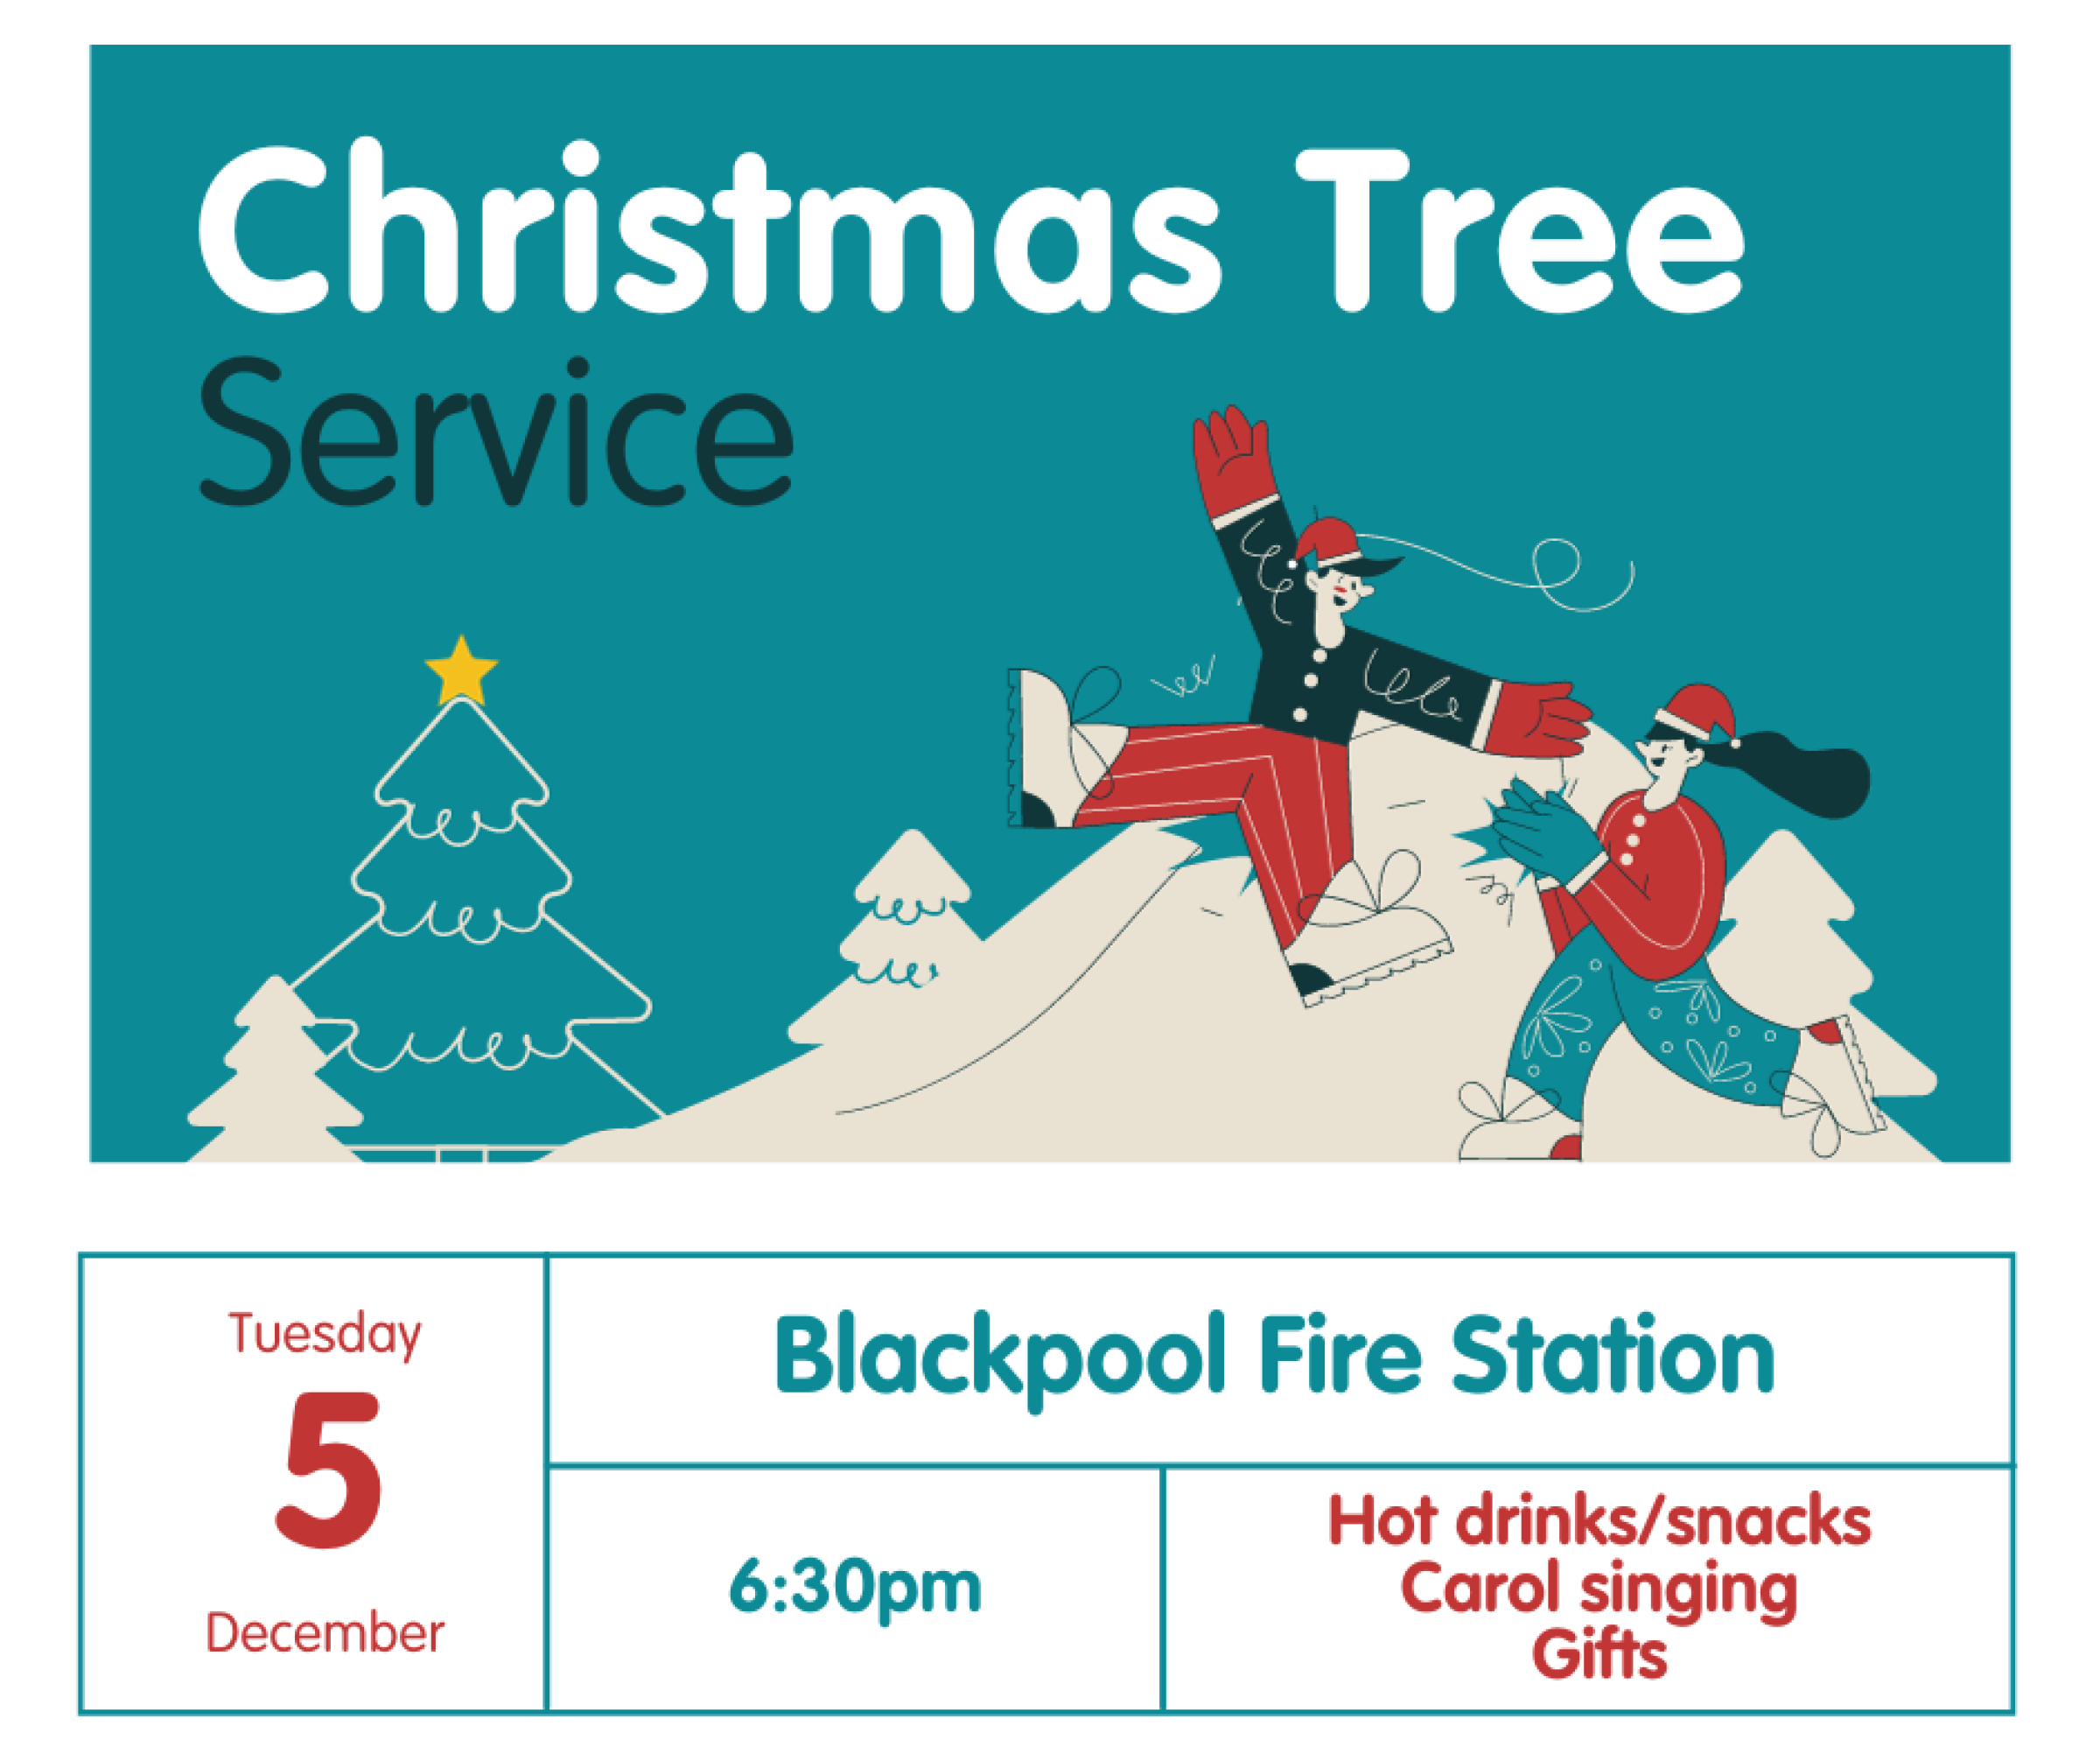 Christmas Tree Service, Tuesday 5 December, Blackpool Fire Station, 6:30pm